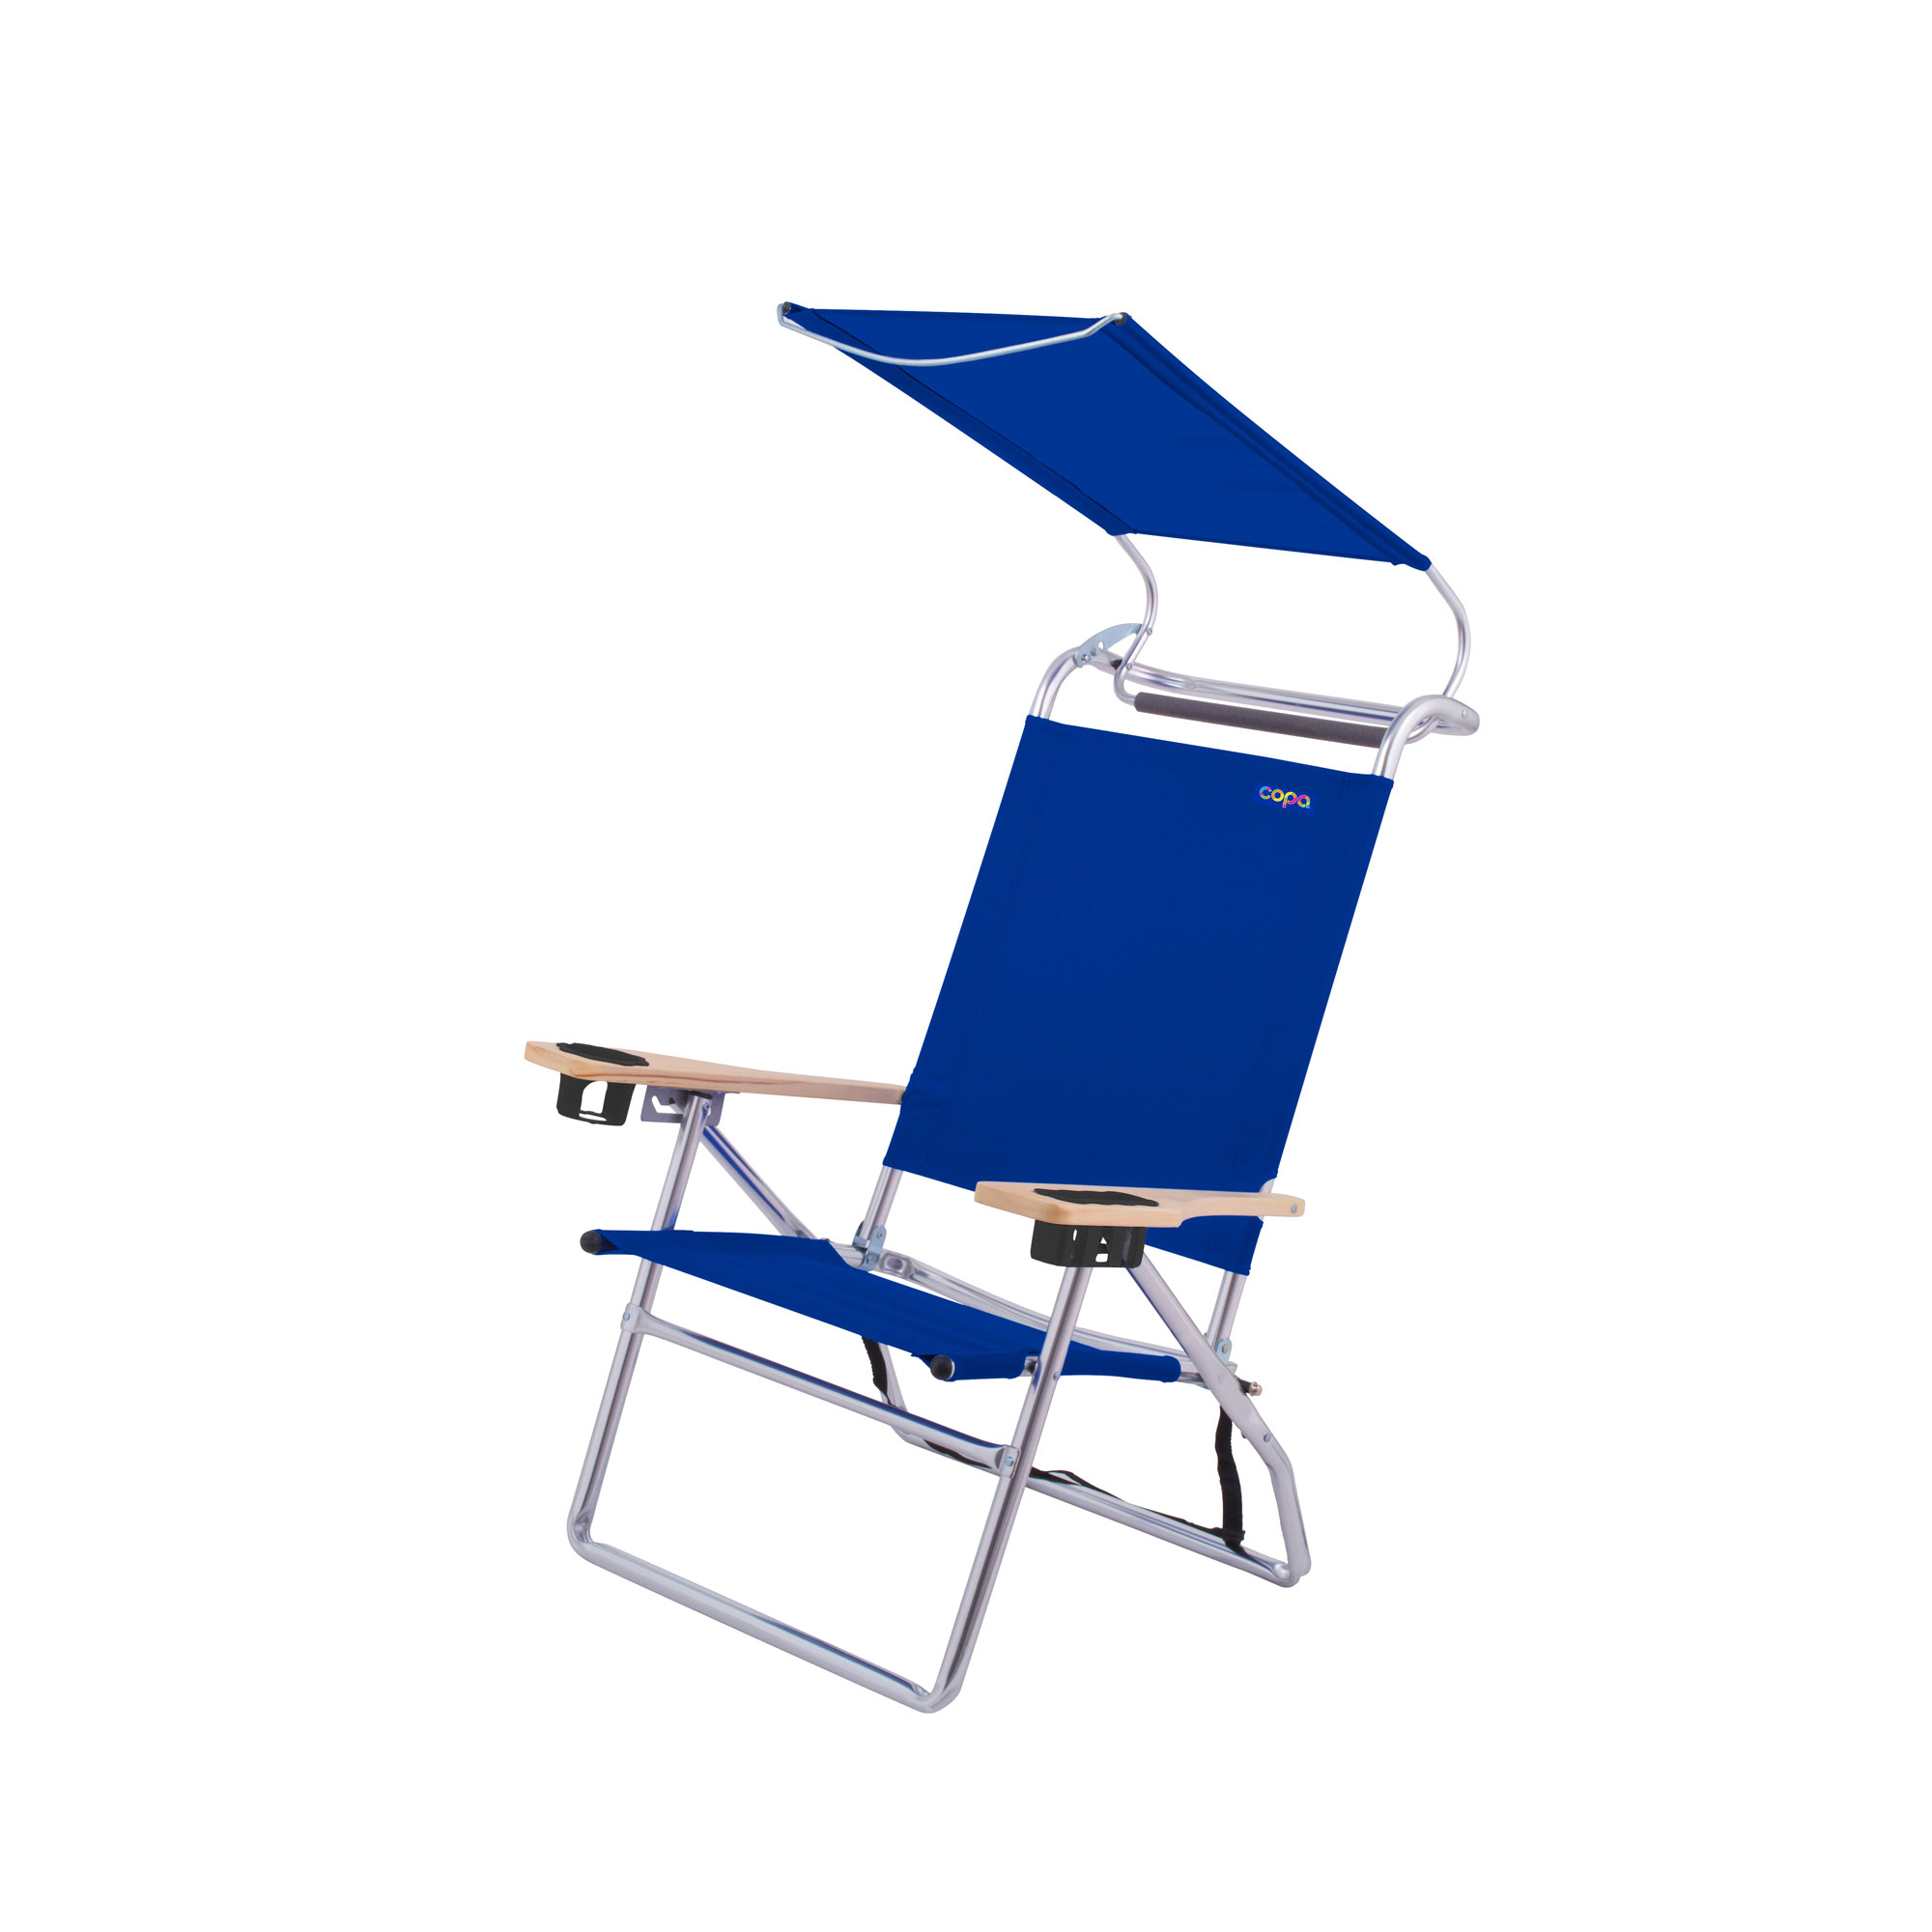 Unique Copa Beach Chair With Canopy for Simple Design